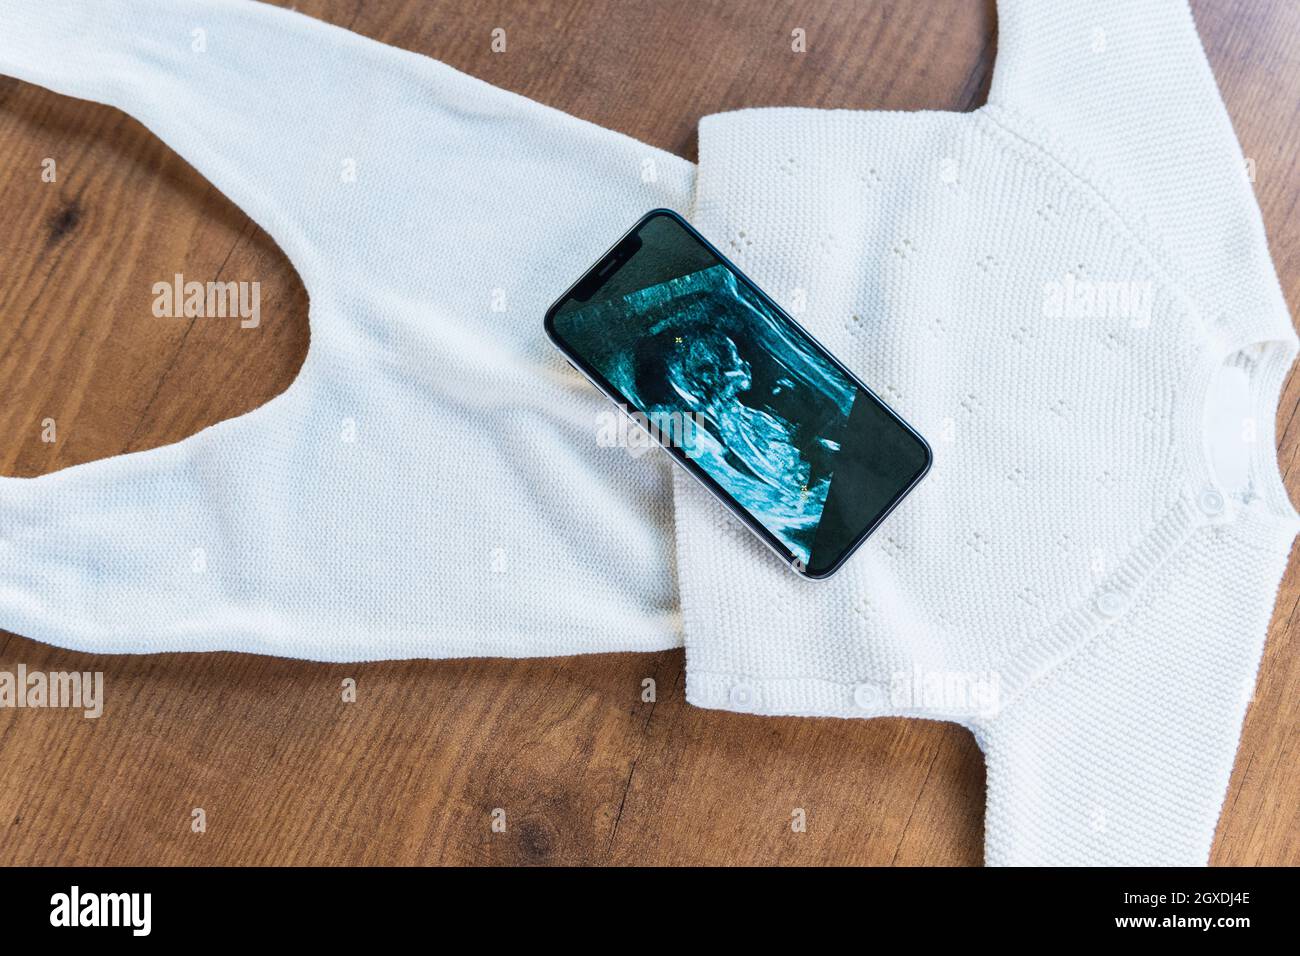 From above of cellphone with image of baby ultrasound placed on child outfit as concept of pregnancy Stock Photo